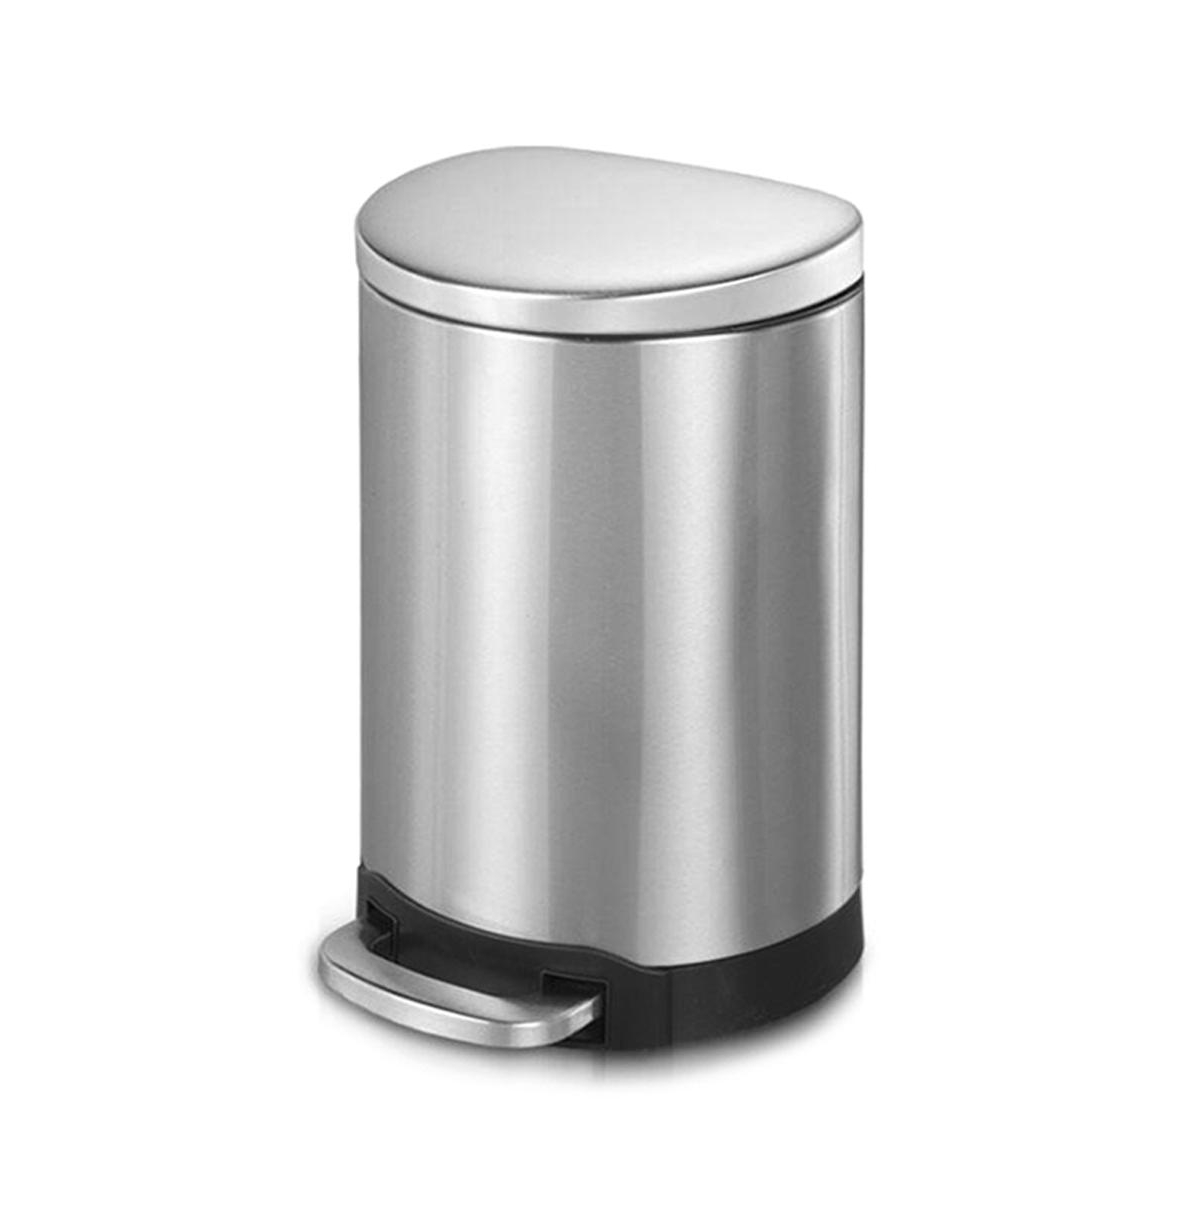 10.6 Gal./40 Liter Stainless Steel Semi-round Step-on Trash Can for Kitchen - Silver